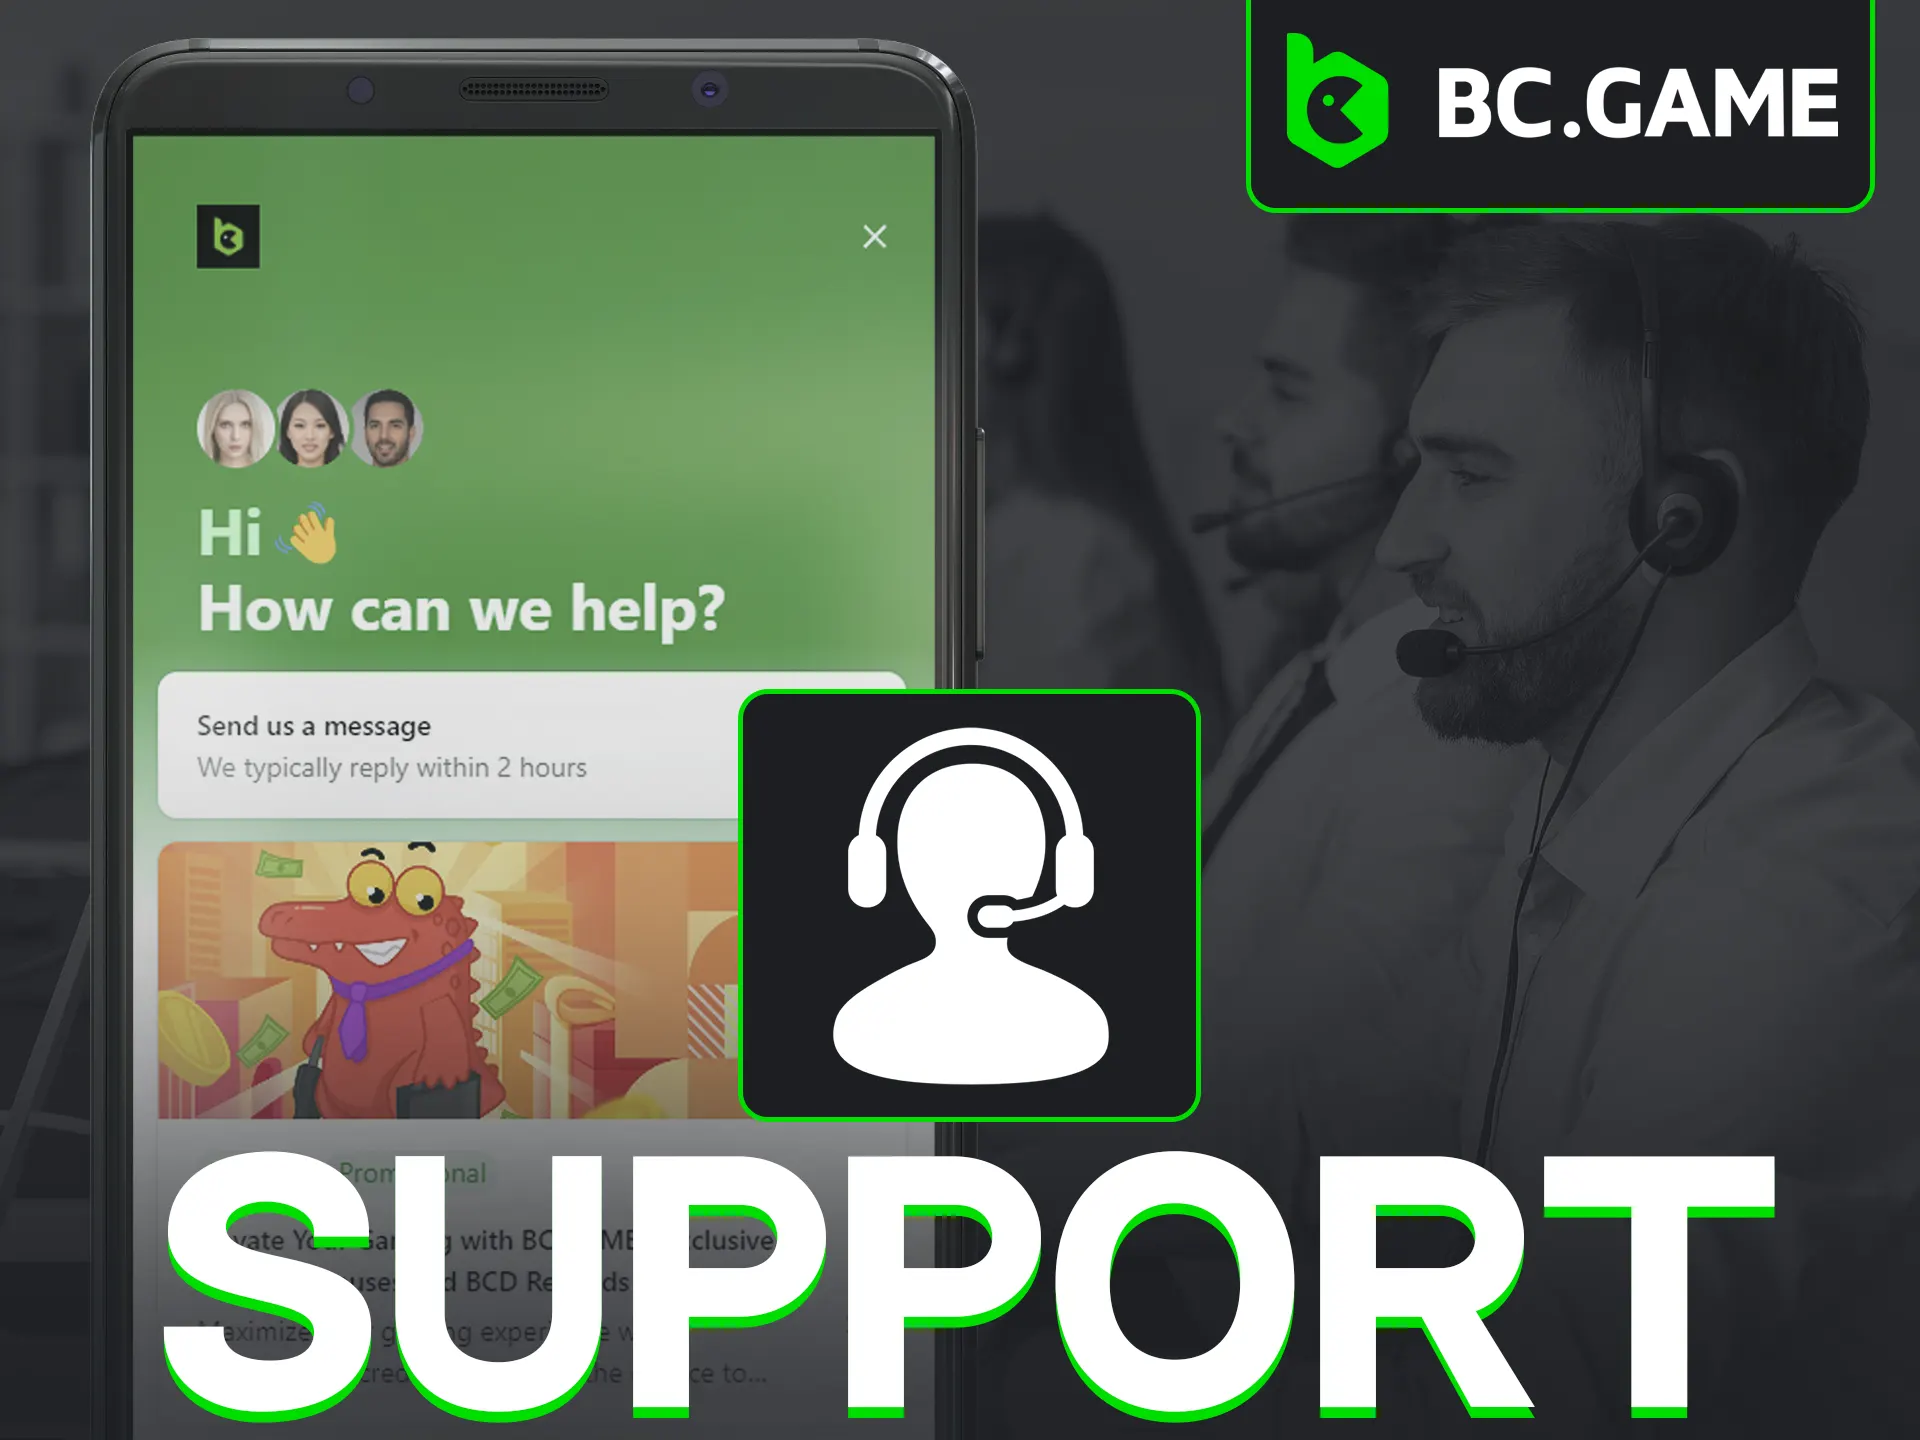 Get a quick help with 24/7 support at BC Game.